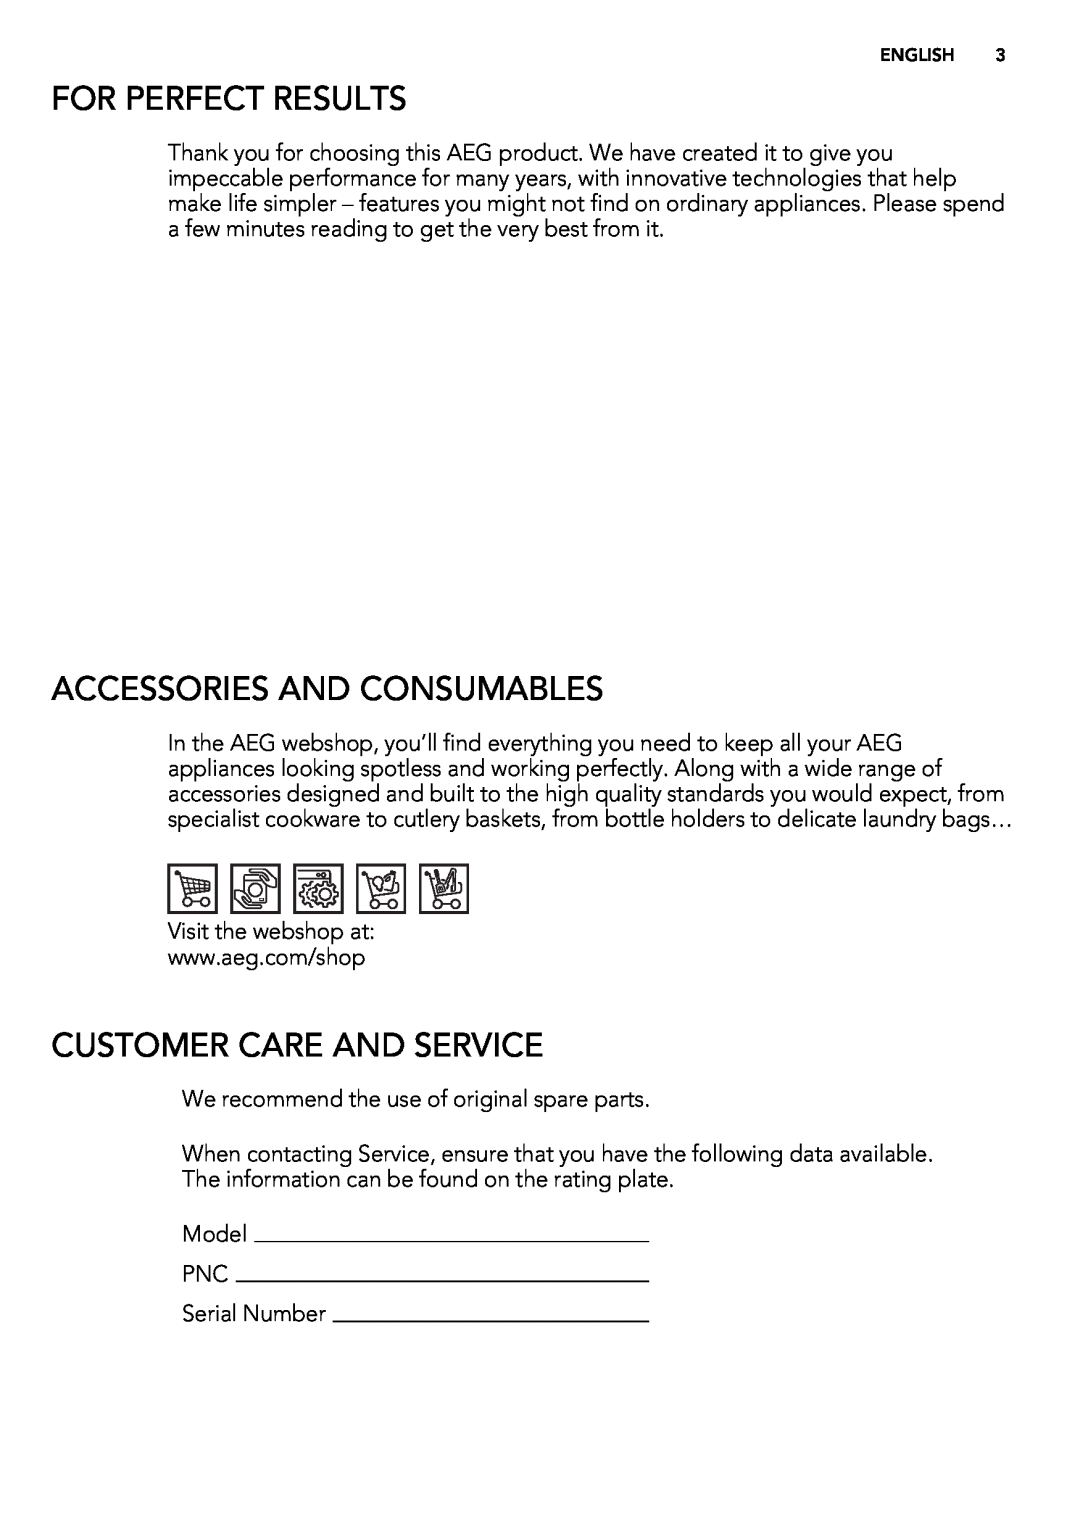 AEG 88009 user manual For Perfect Results, Accessories And Consumables, Customer Care And Service 